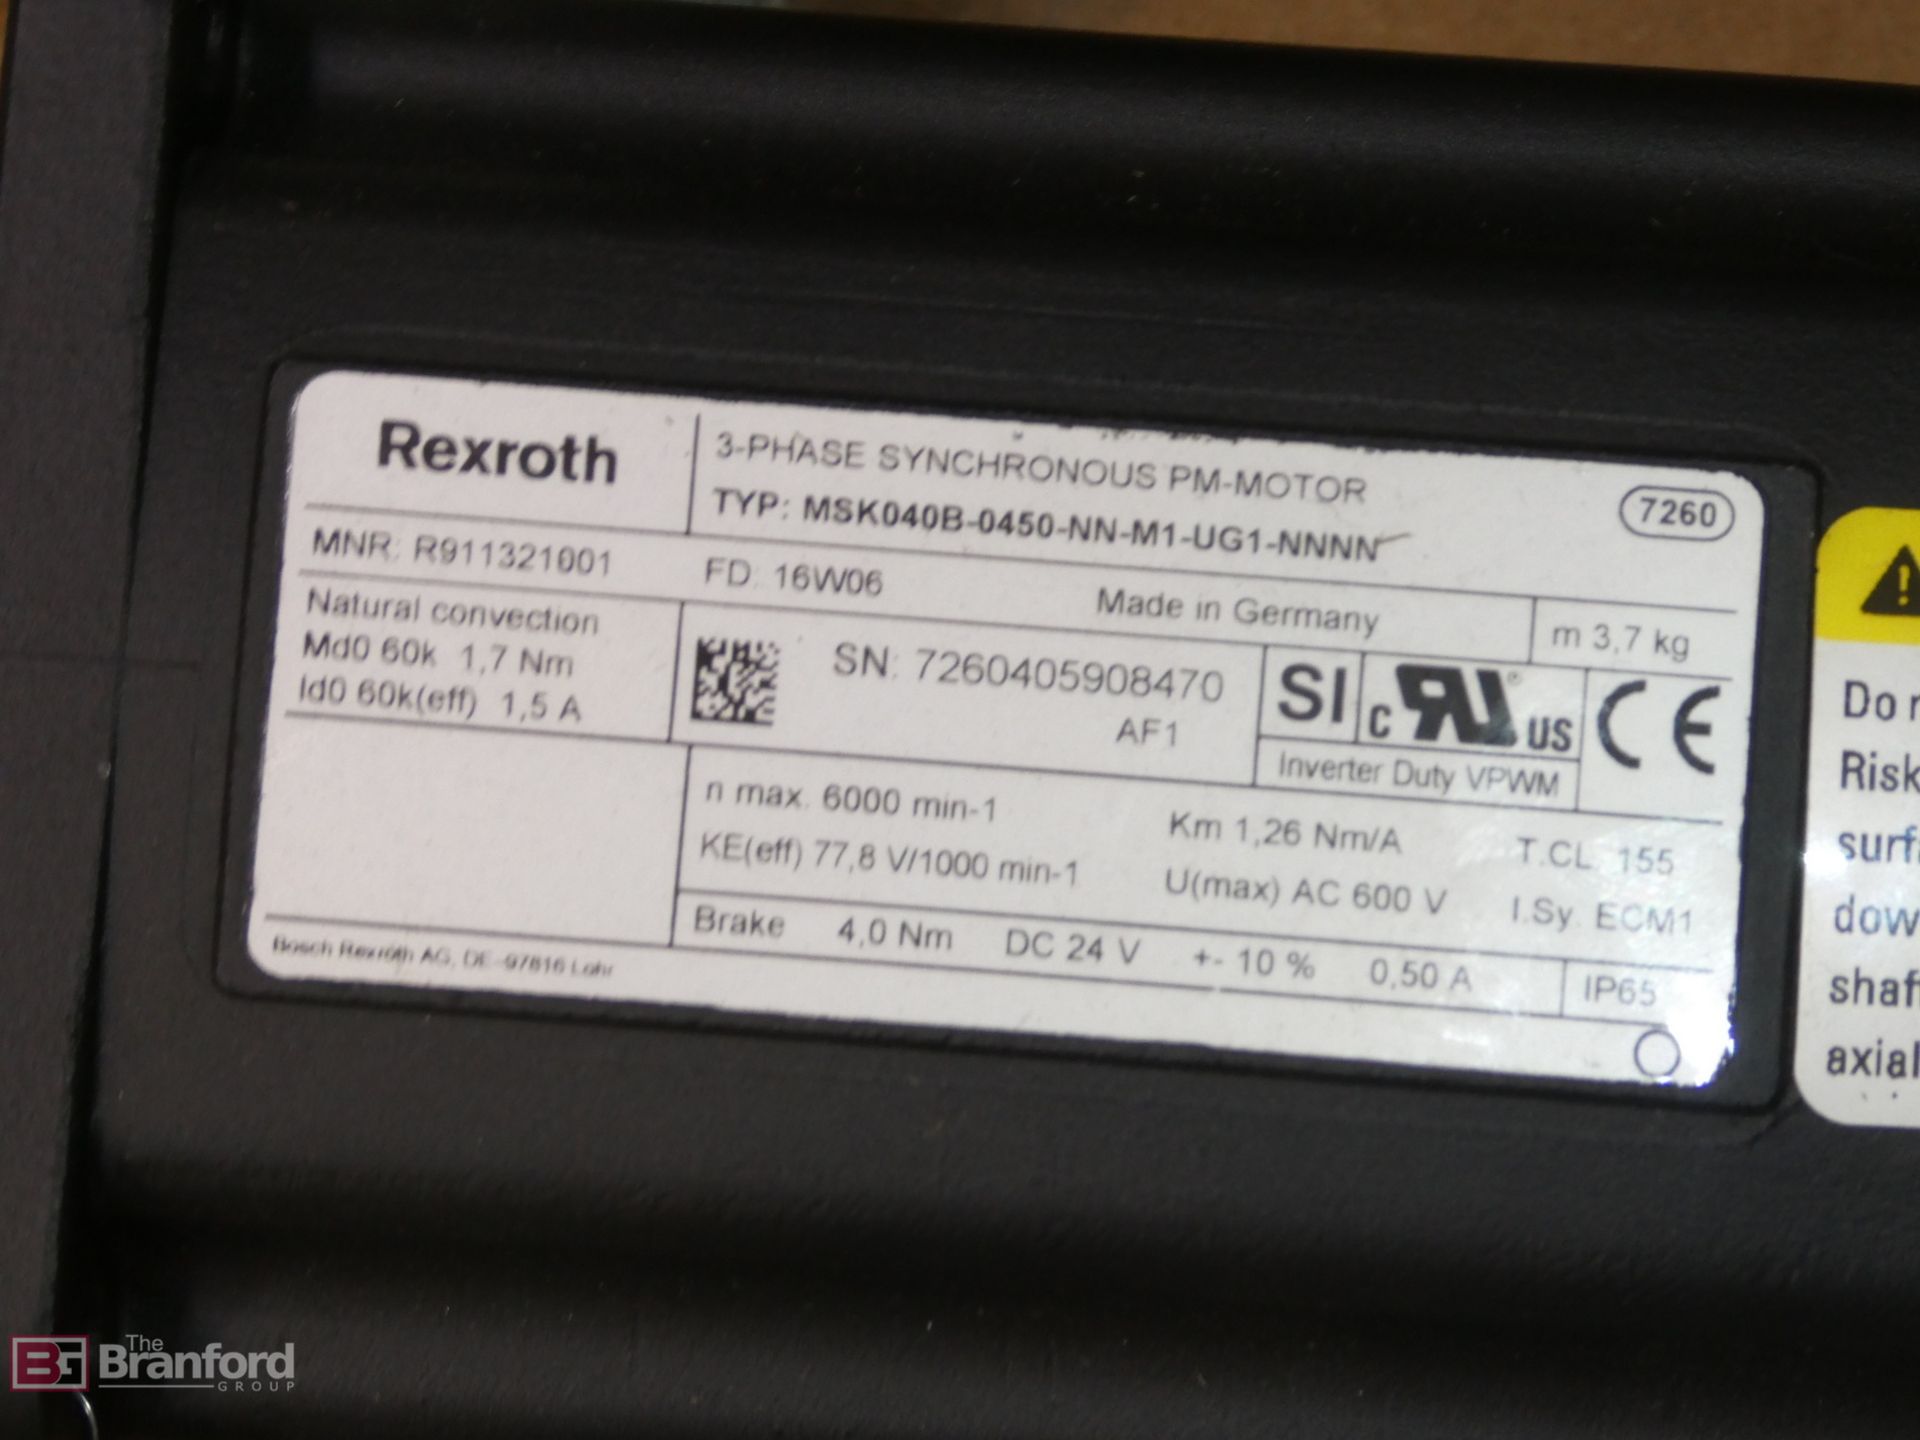 (3) Rexroth Type MSK040B0450NMM1UG1NNNN, Synchronous 3-Phase PM-Motor - Image 3 of 3